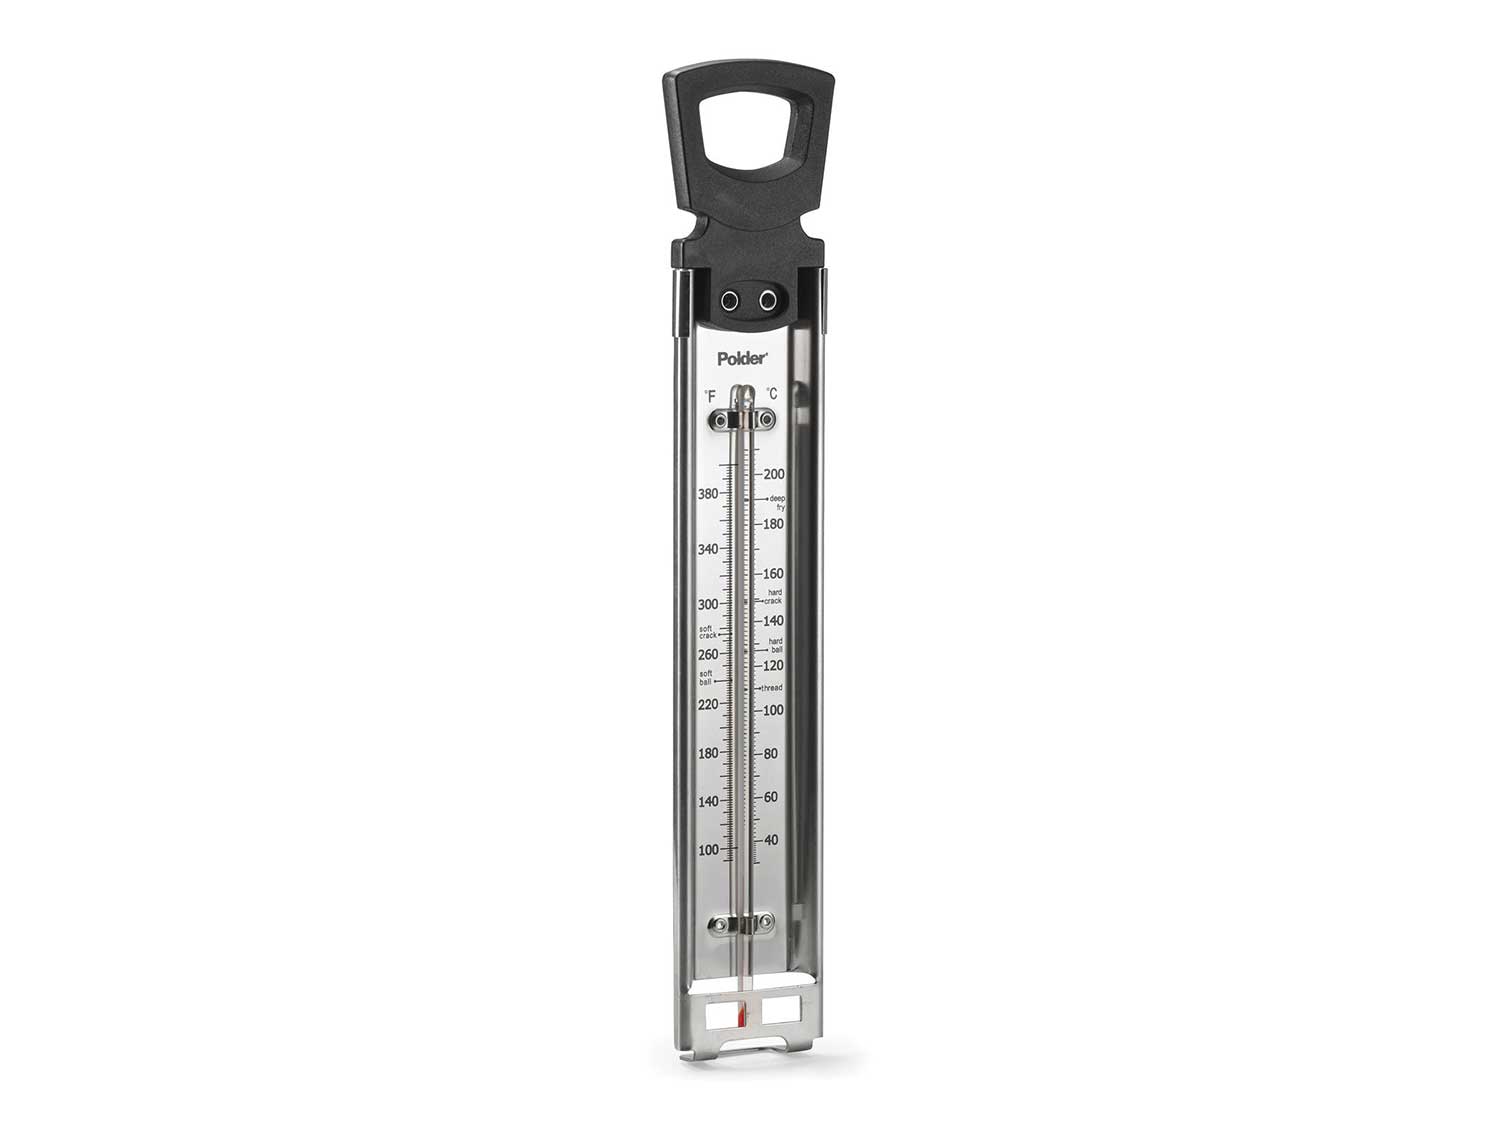 Making Candy? A Precise Thermometer Is A Must-Have Tool